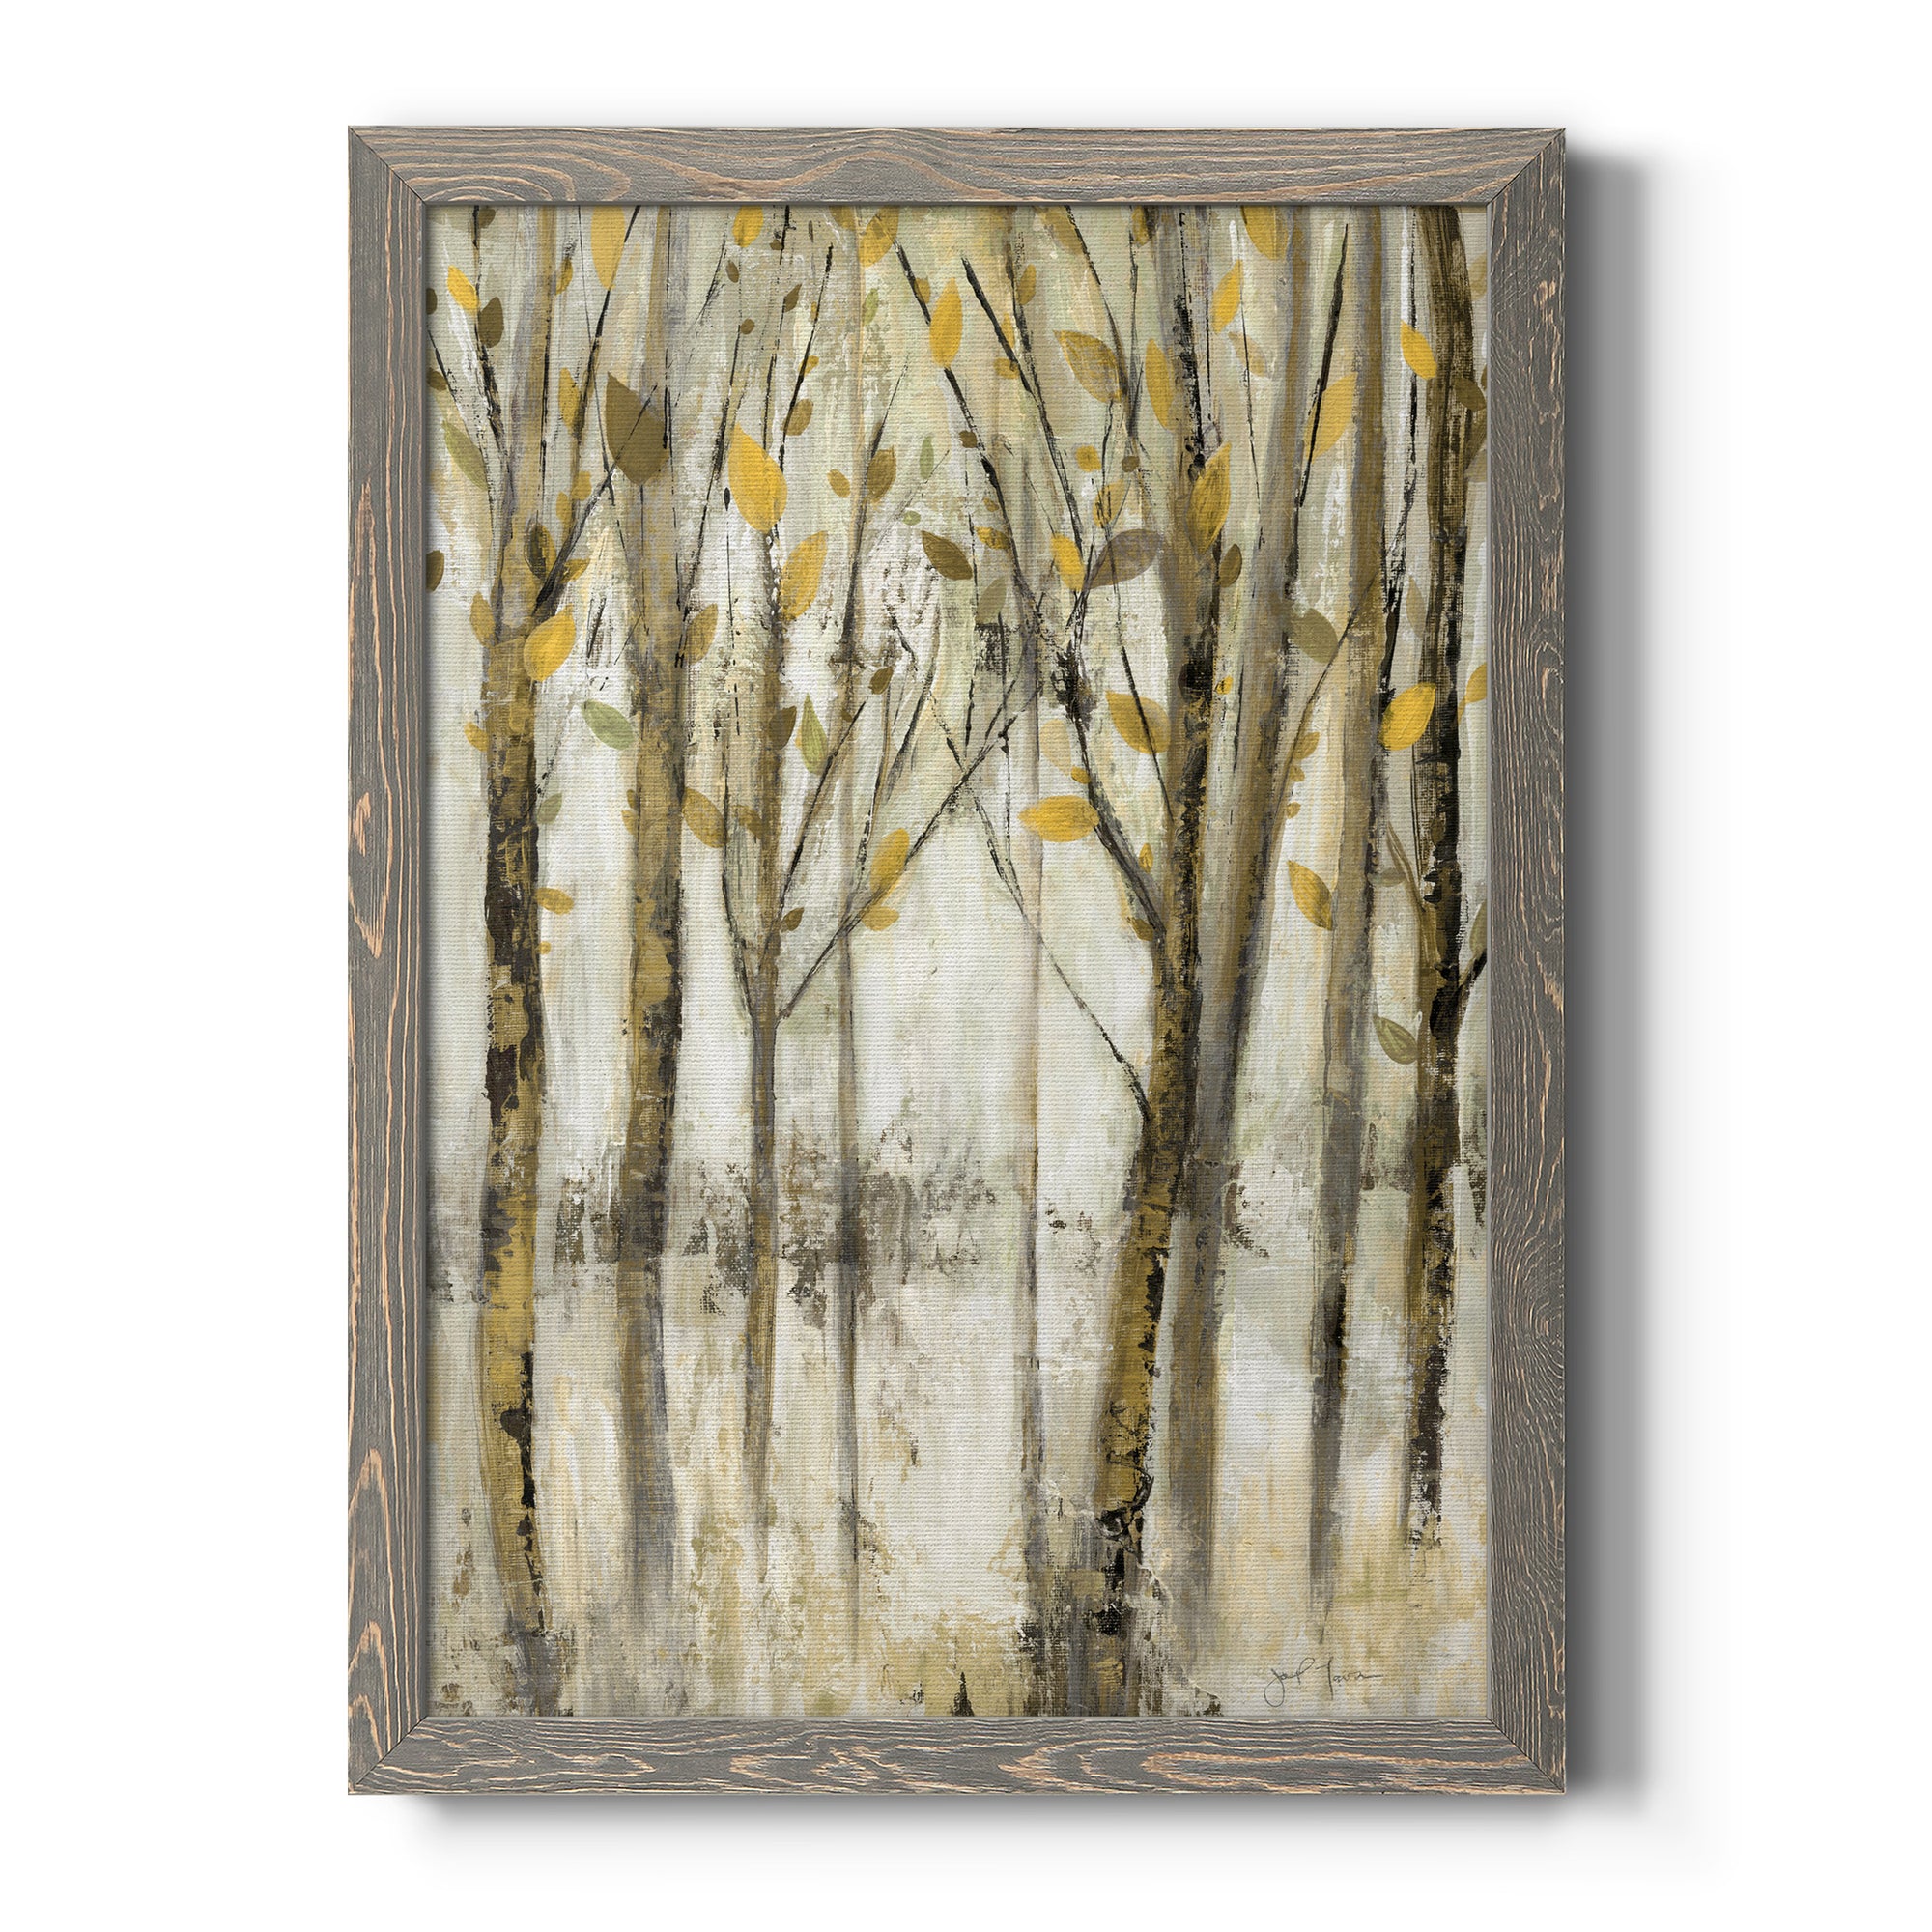 See The Light - Premium Canvas Framed in Barnwood - Ready to Hang